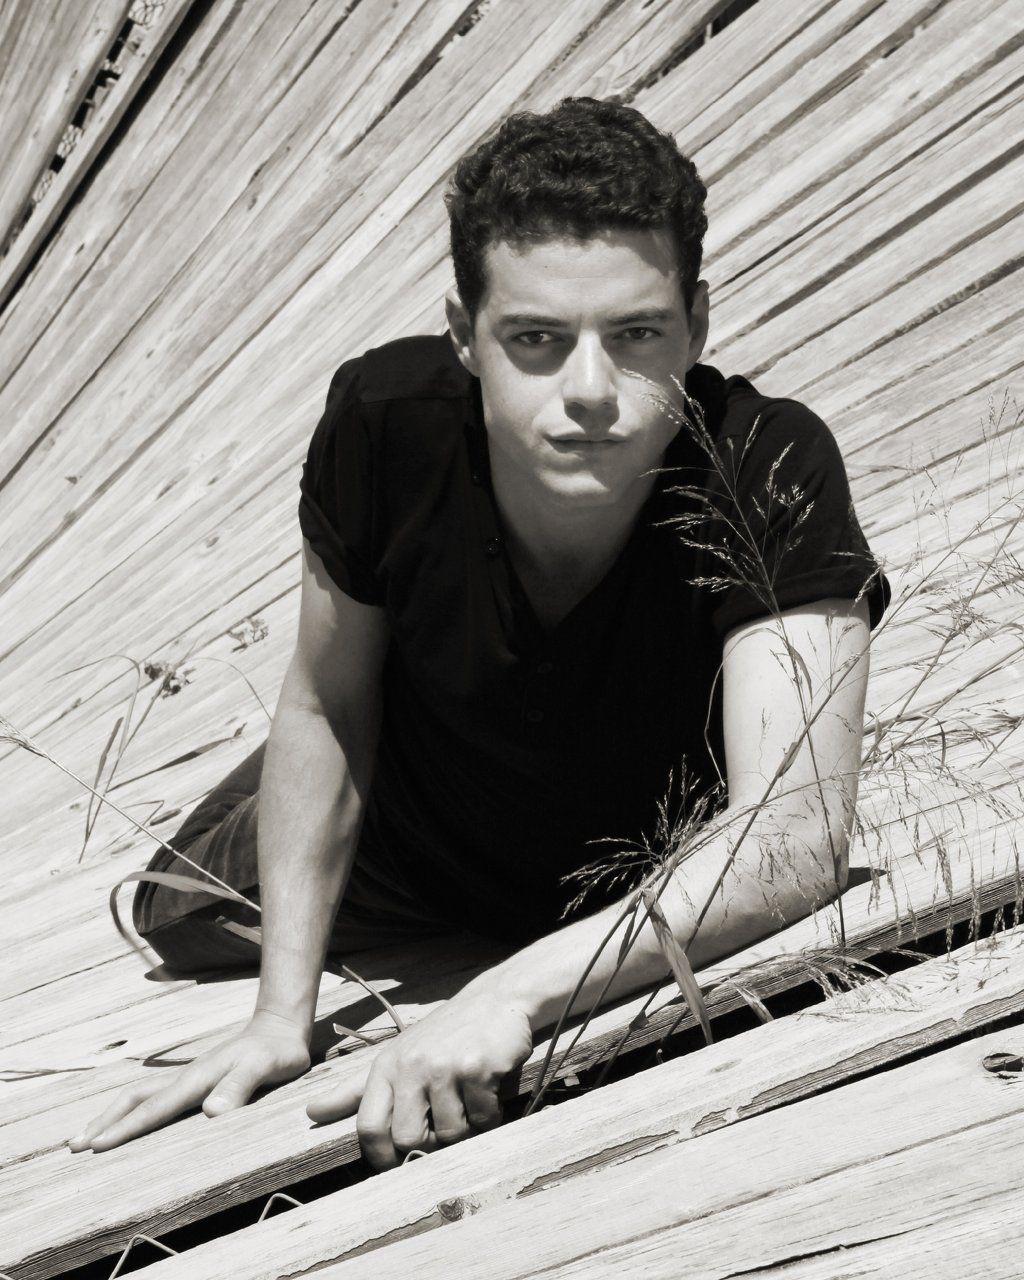 Rami Malek Wallpaper and Picture, We Search All Over World Wide